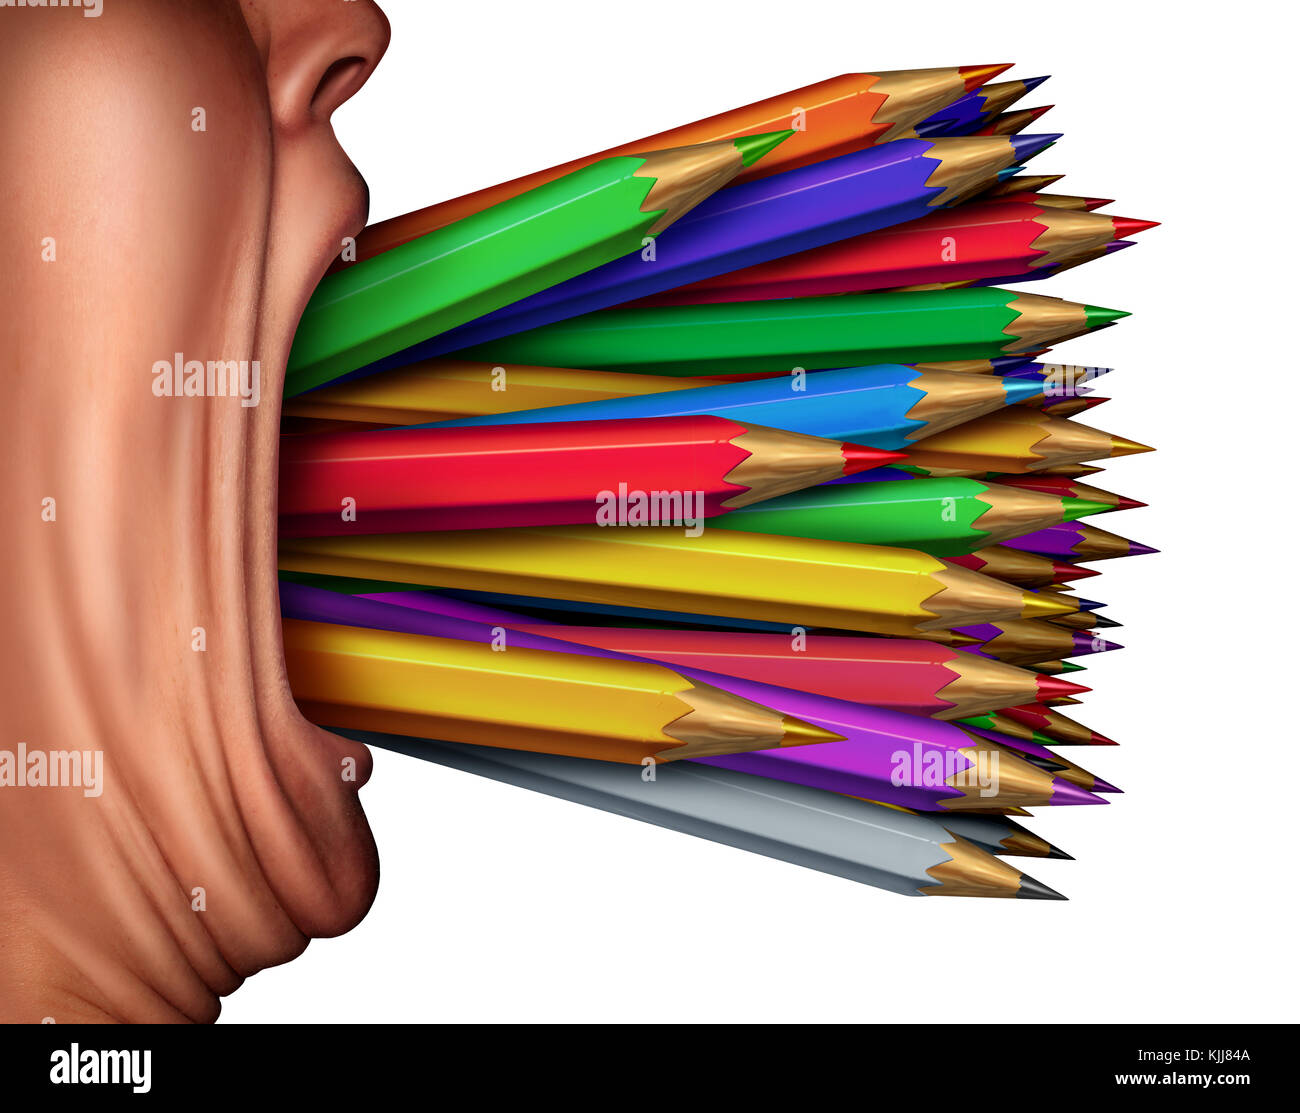 Creativity expression and creating content as a designer symbol as a person with color pencil crayons coming out of an open mouth. Stock Photo